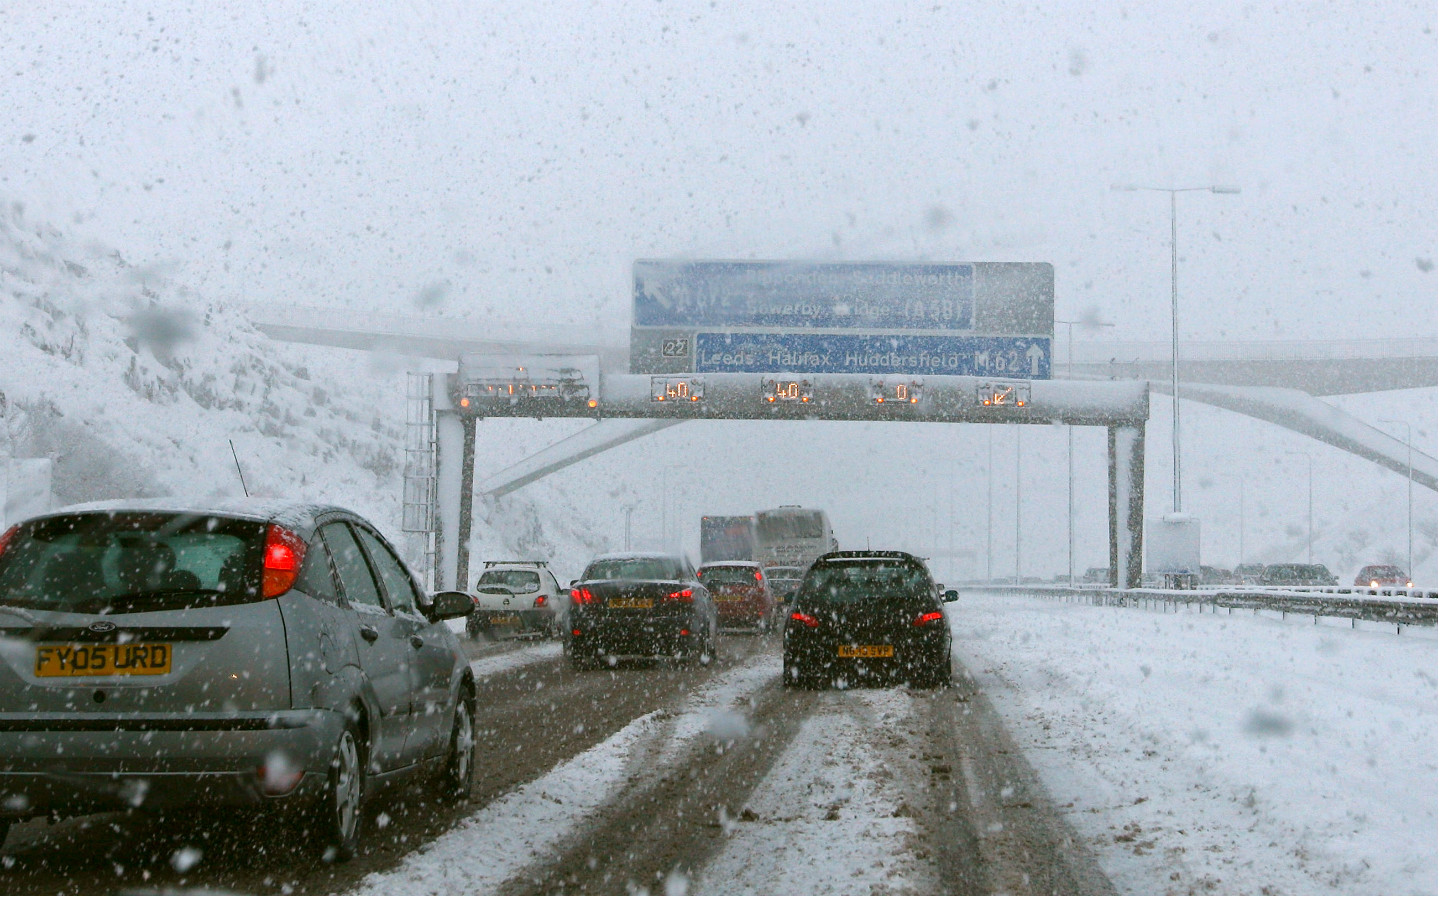 Caught on camera: white-out on M62 leaves thousands stranded overnight